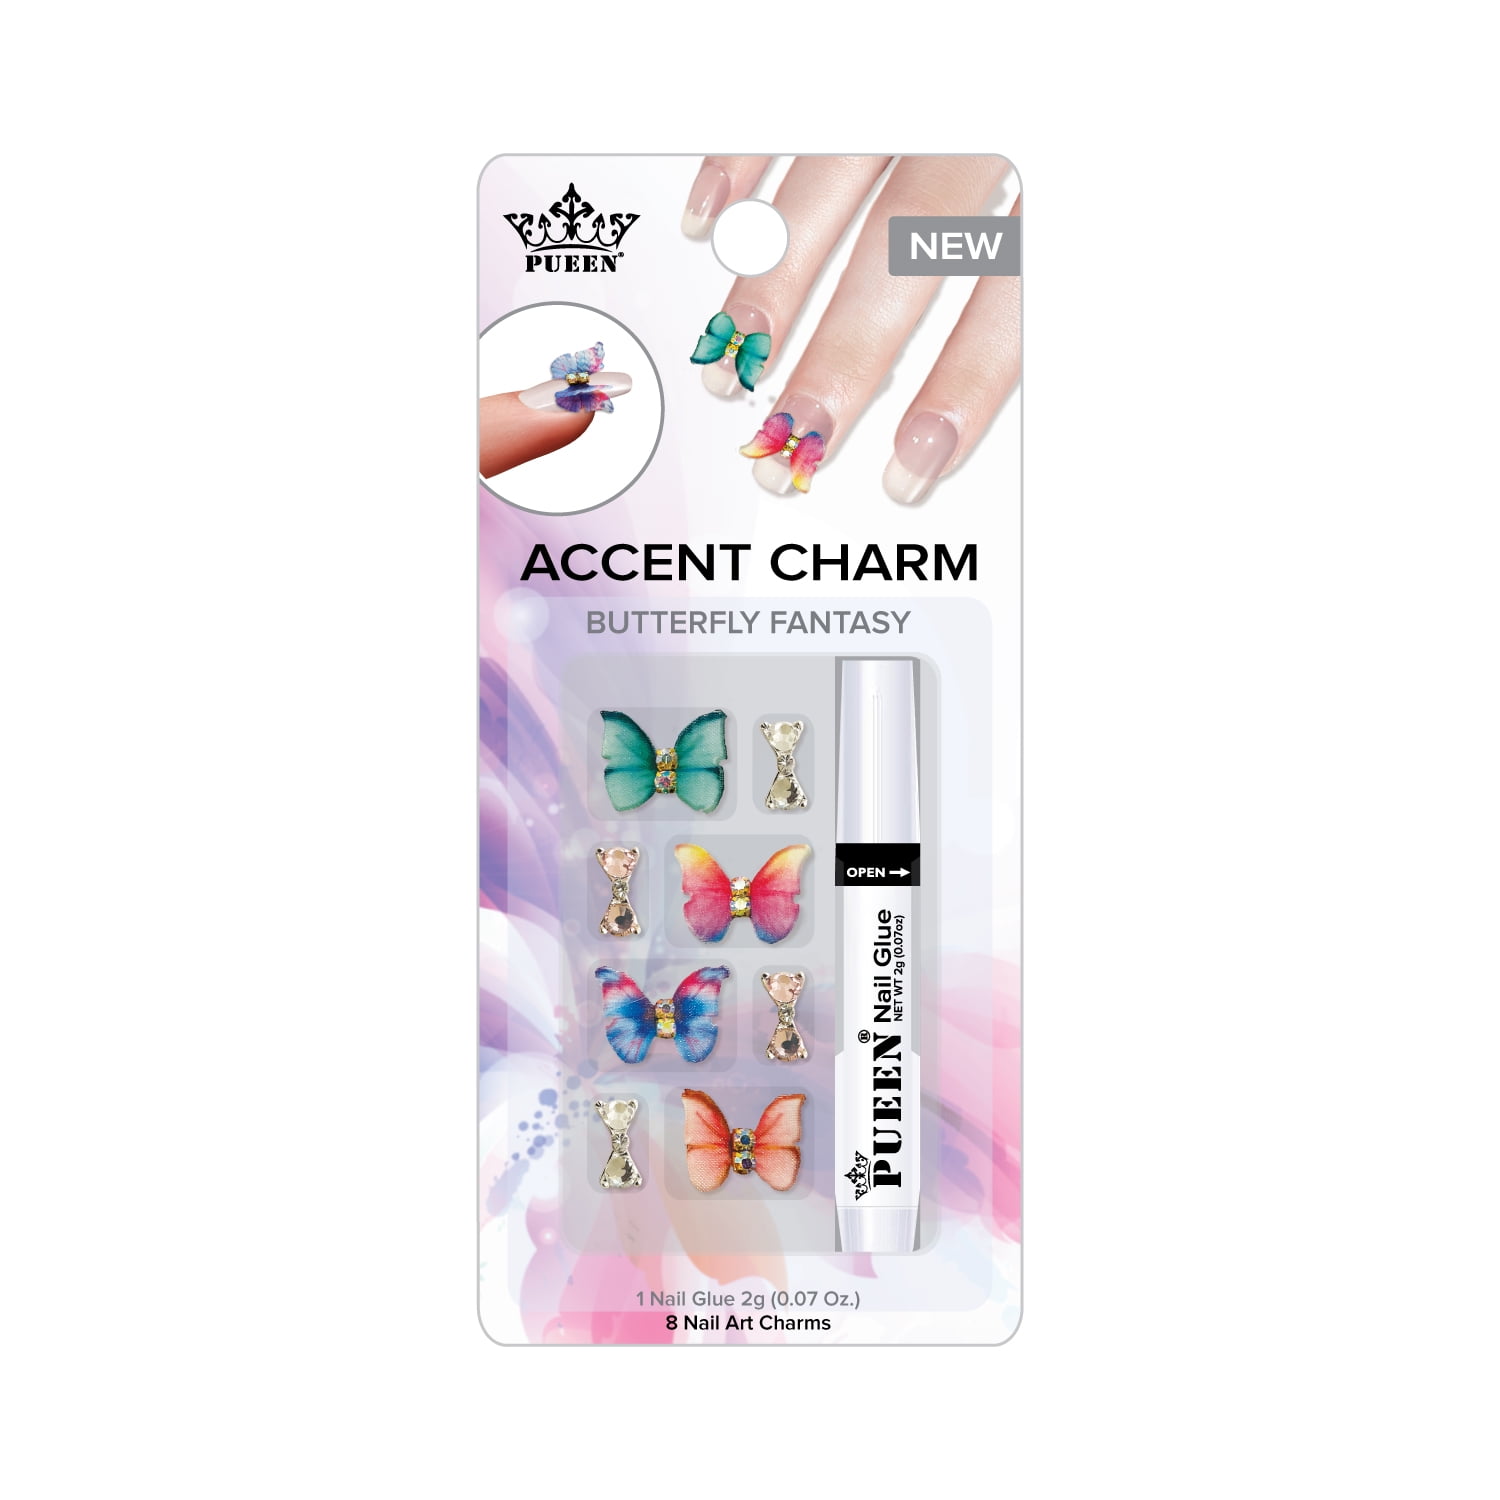 Pueen Nail Art Kit Multicolor Lace Butterfly Fantasy 3D Accent Charms